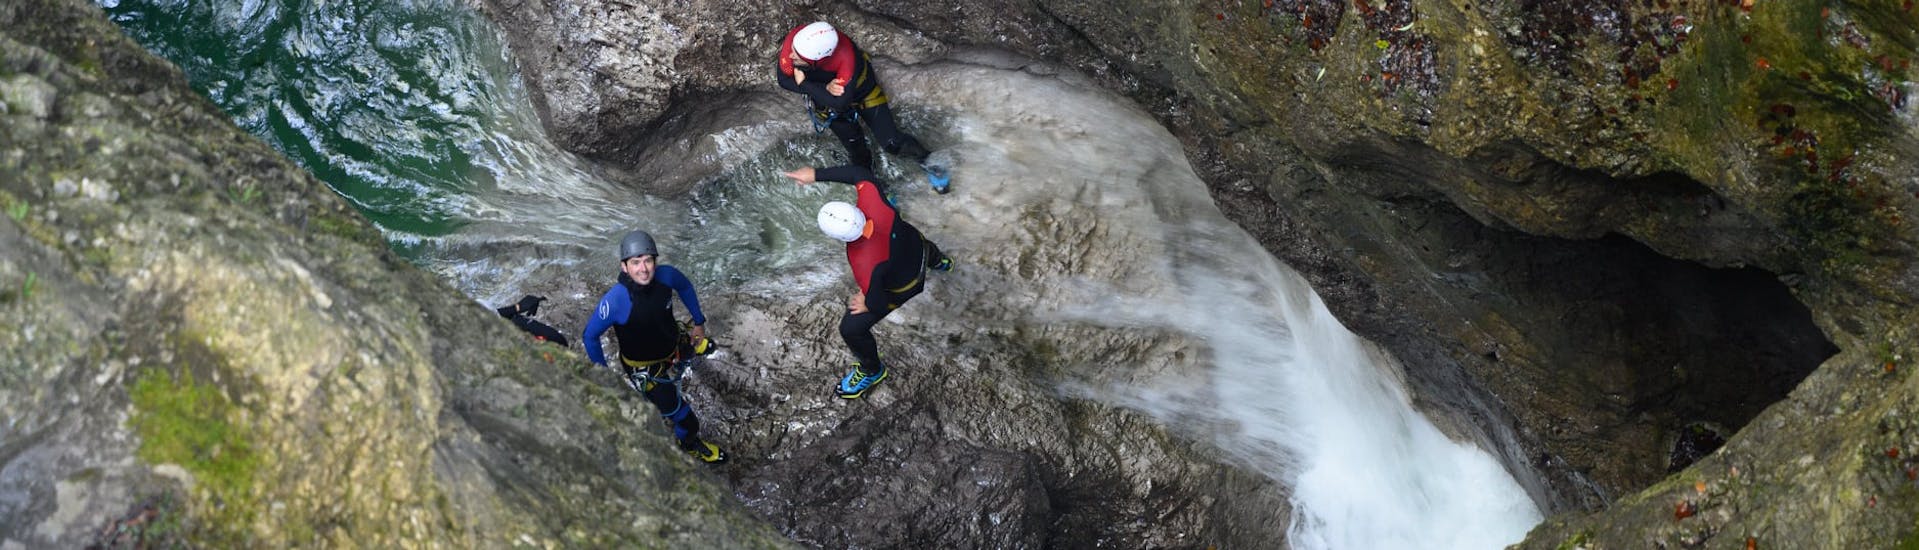 Three man standing in the Taxaklamm while Canyoning in the Taxaklamm near Erpfendorf with Outdoor Guide Kaiserwinkl.